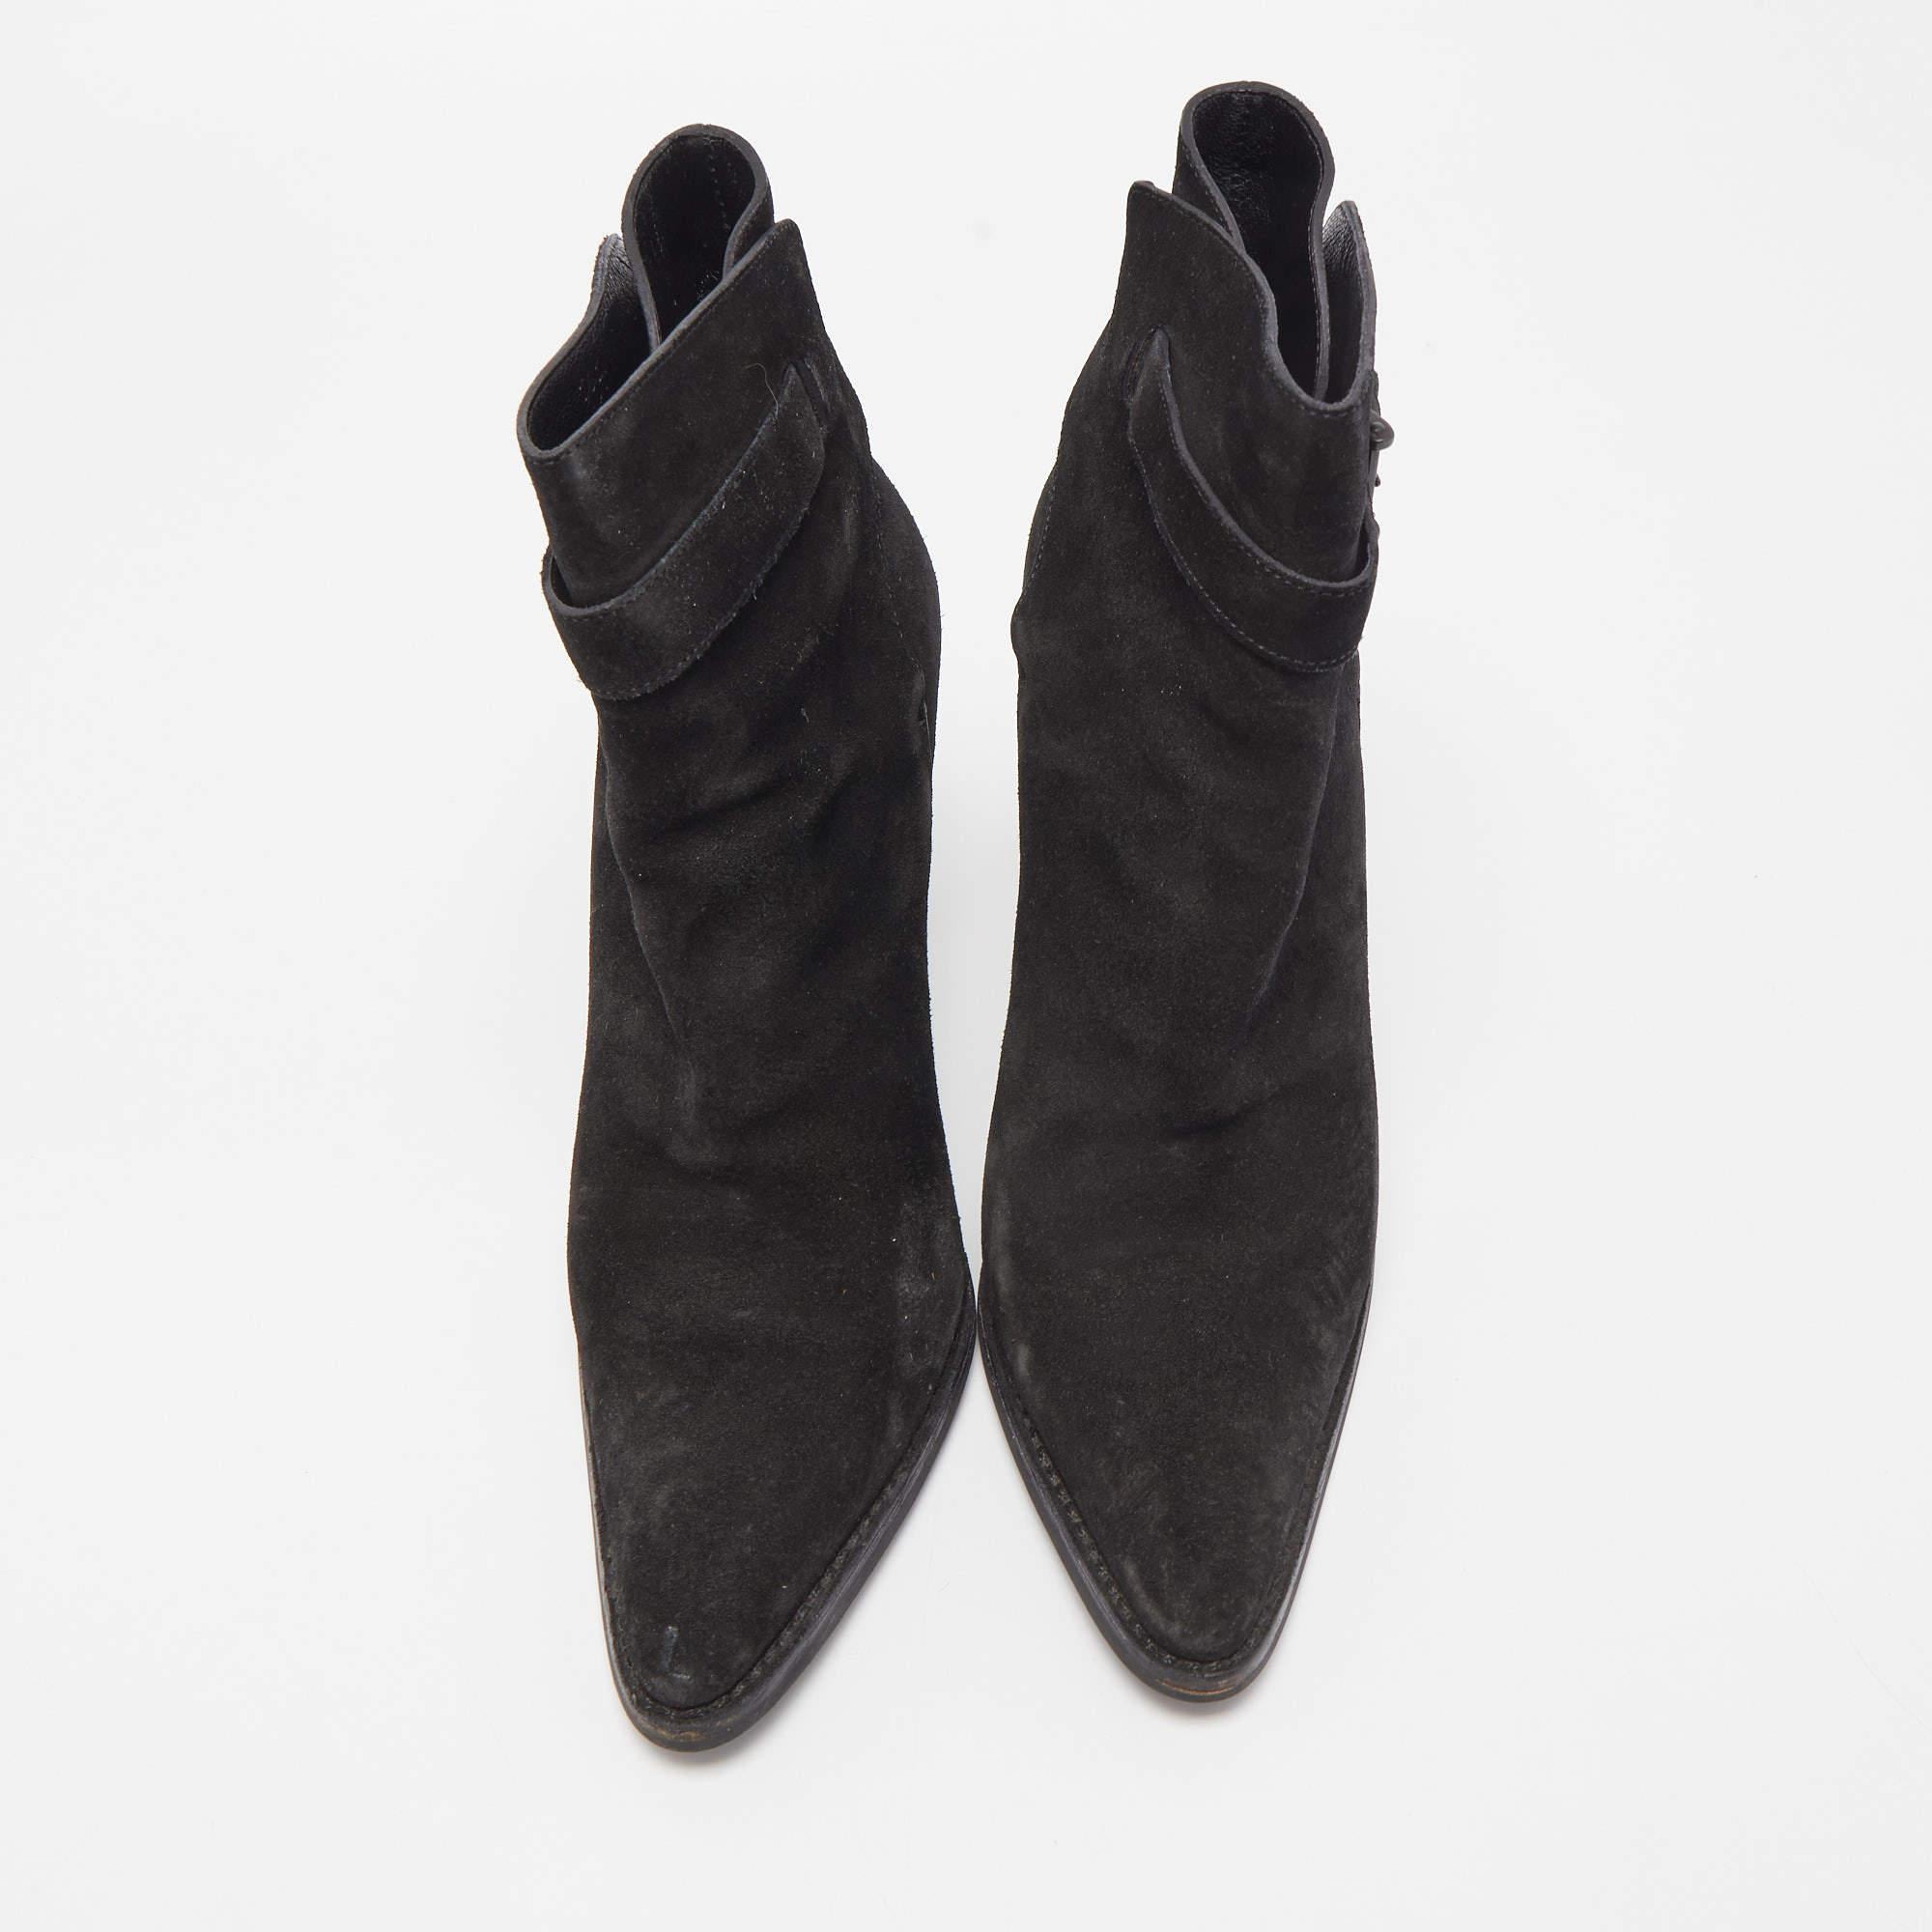 Gucci Black Suede Pointed Toe Ankle Boots Size 39 For Sale 2